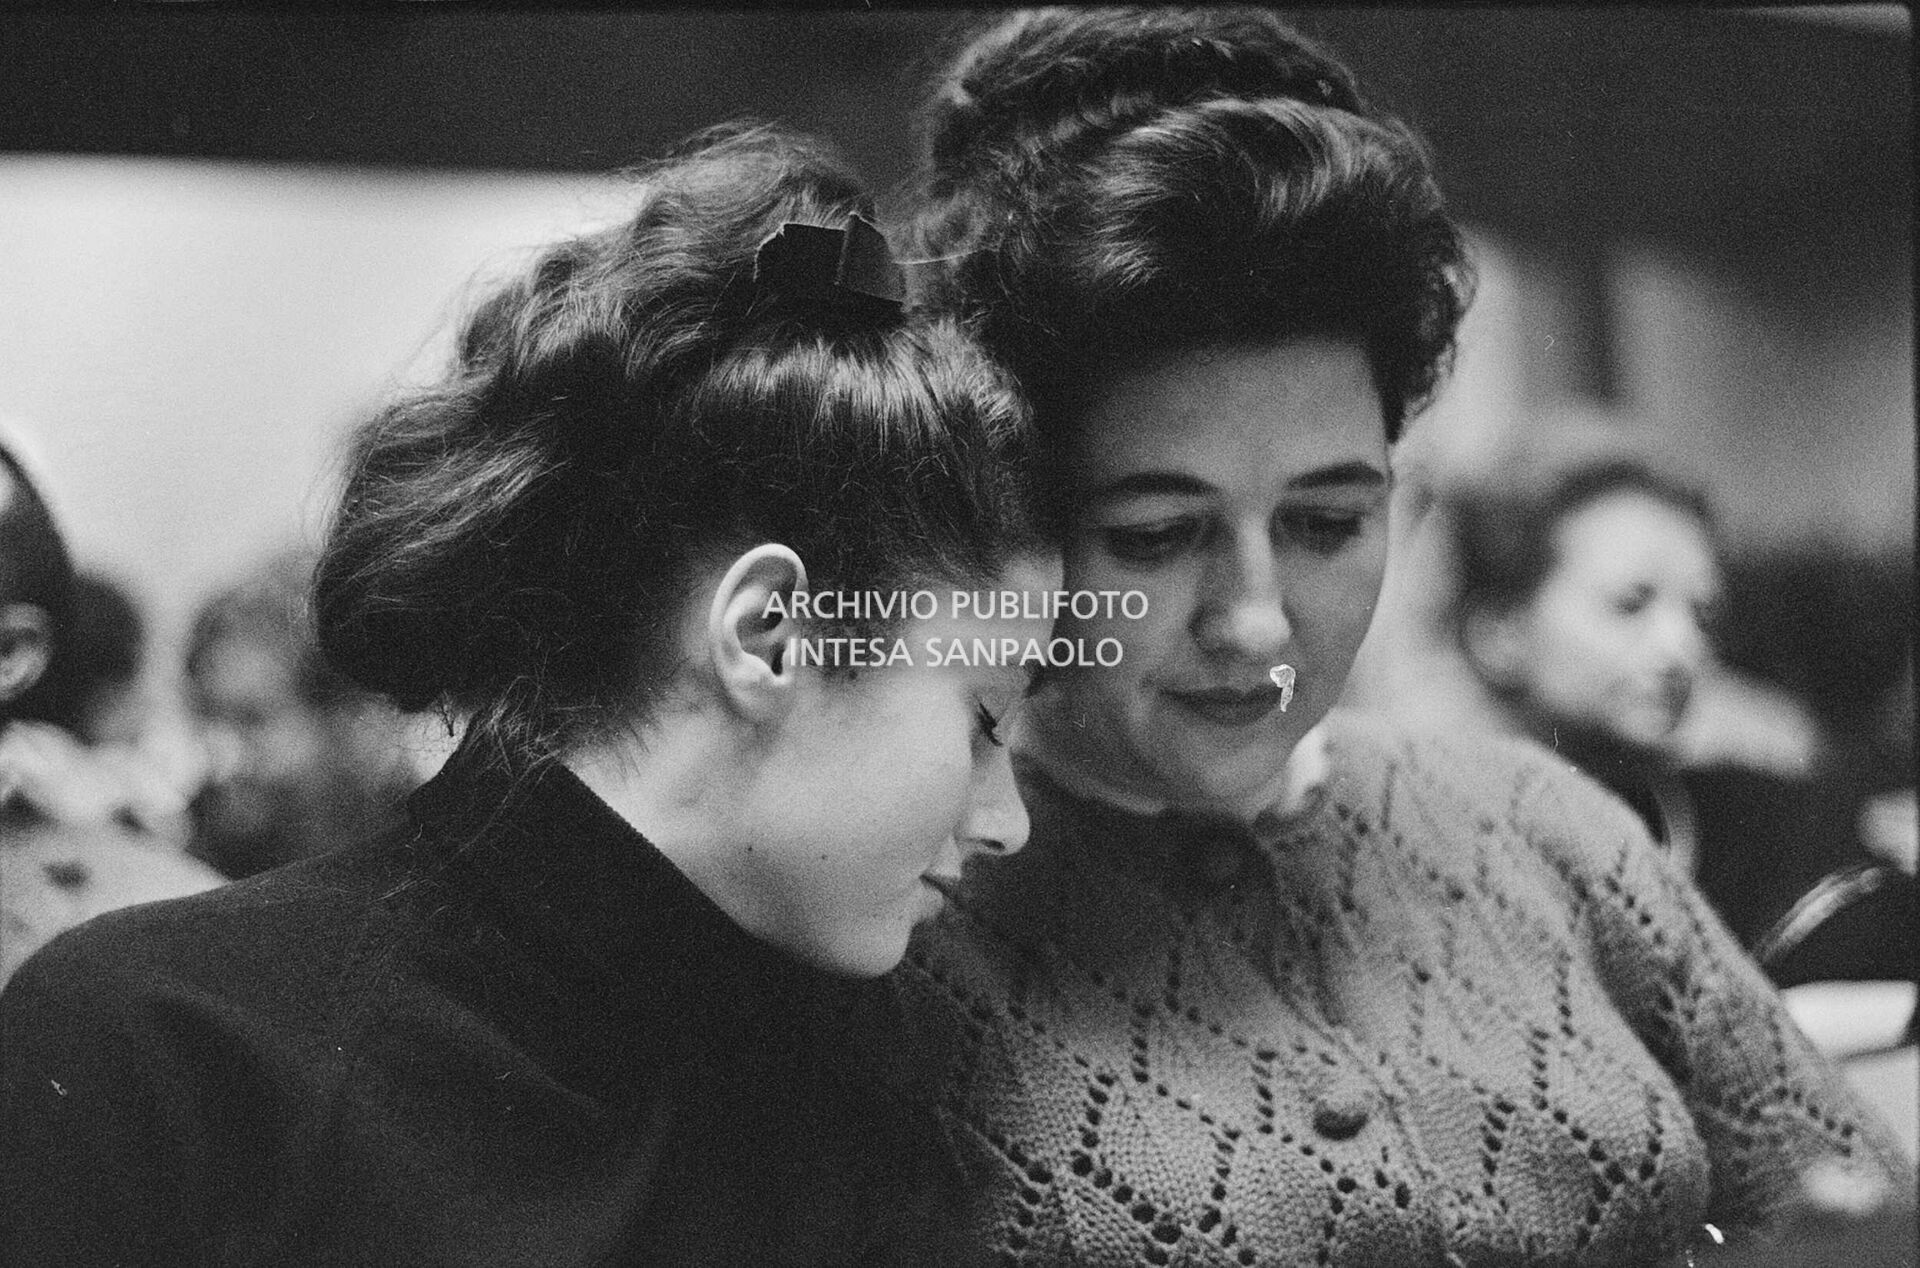 Gigliola Cinquetti, with her mother Sara, during a break at the 14th Sanremo Festival